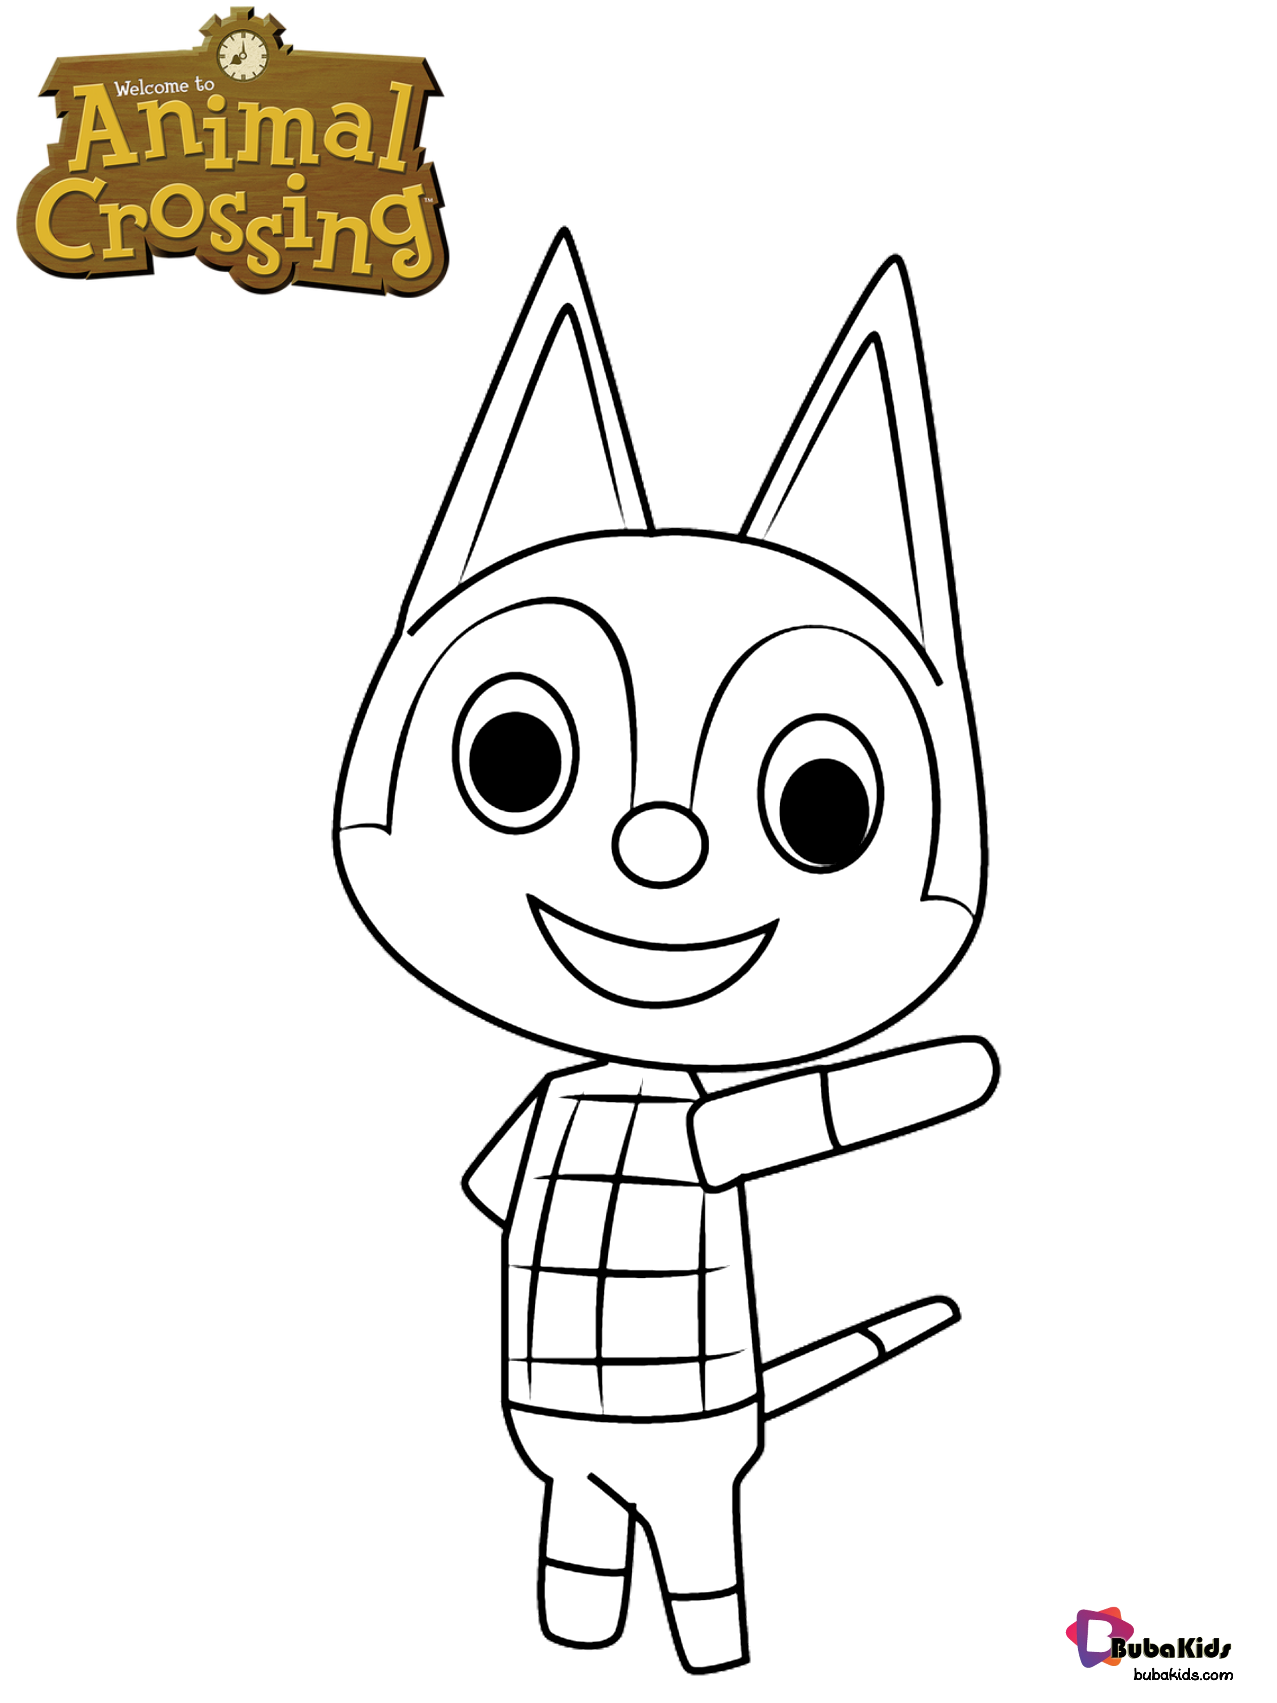 Rudy the cat from animal crossing video games character coloring page Wallpaper